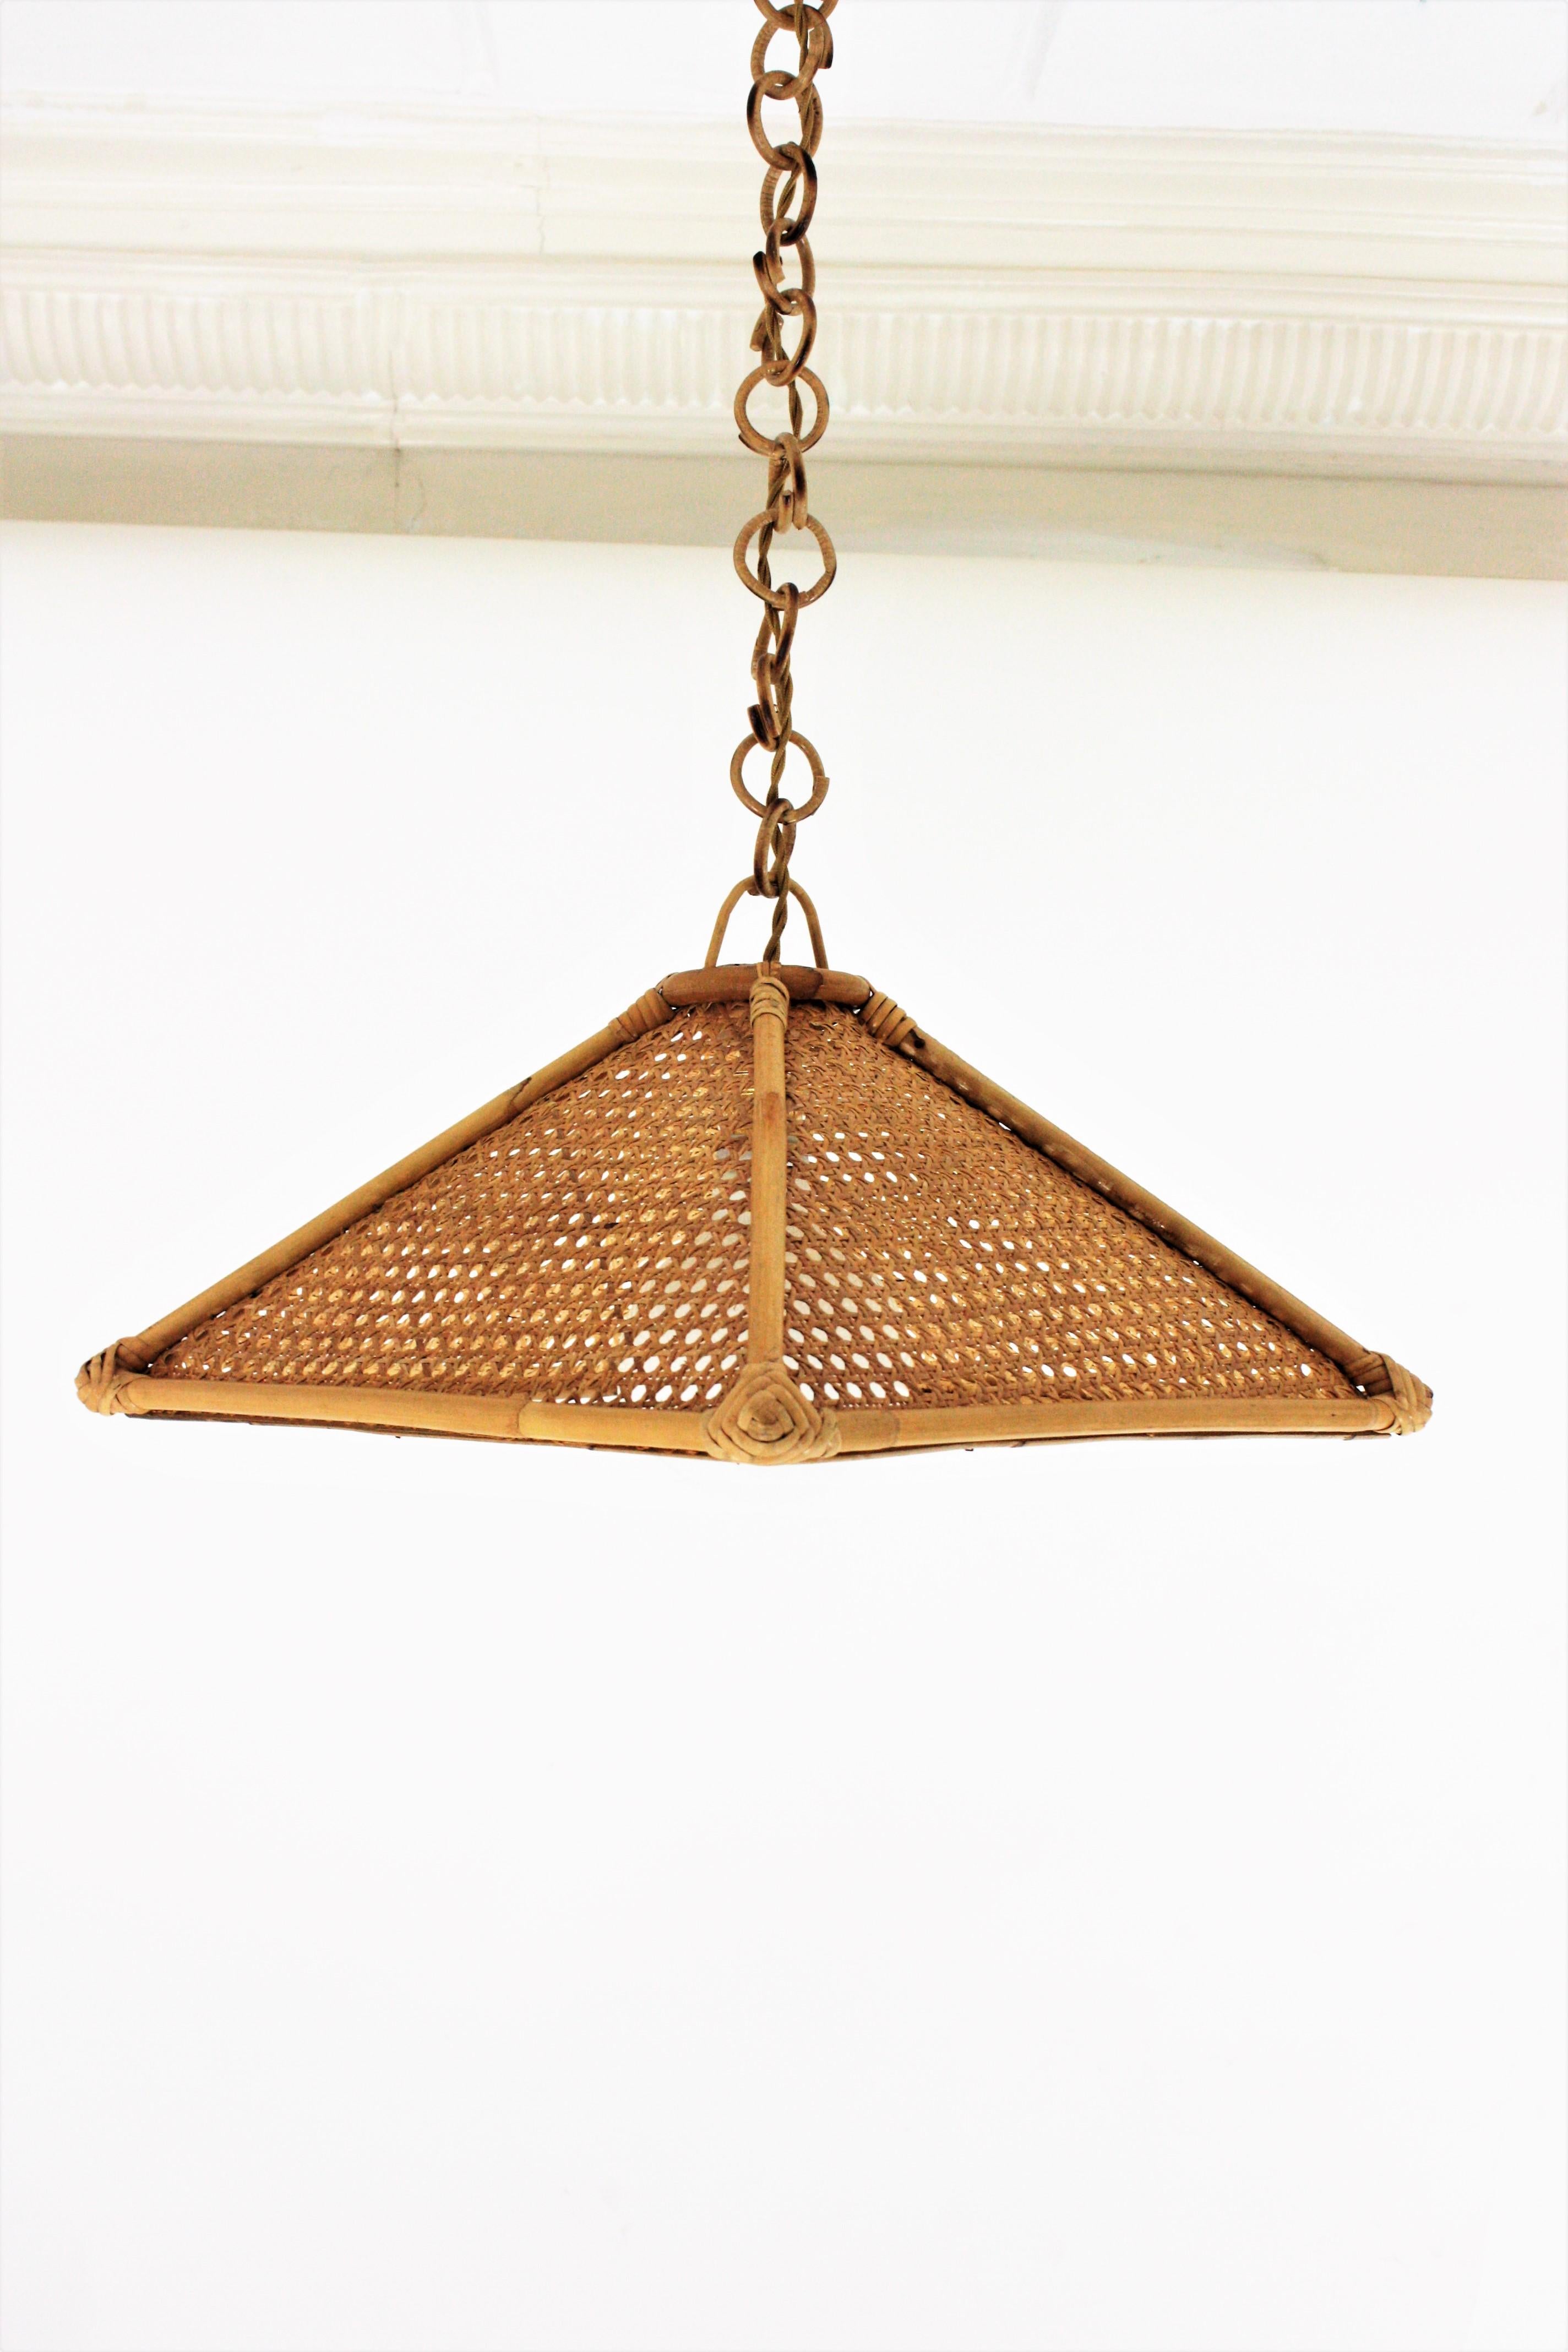 Spanish Modern Rattan and Wicker Wire Trapezoid Pendant Hanging Light, 1960s For Sale 5